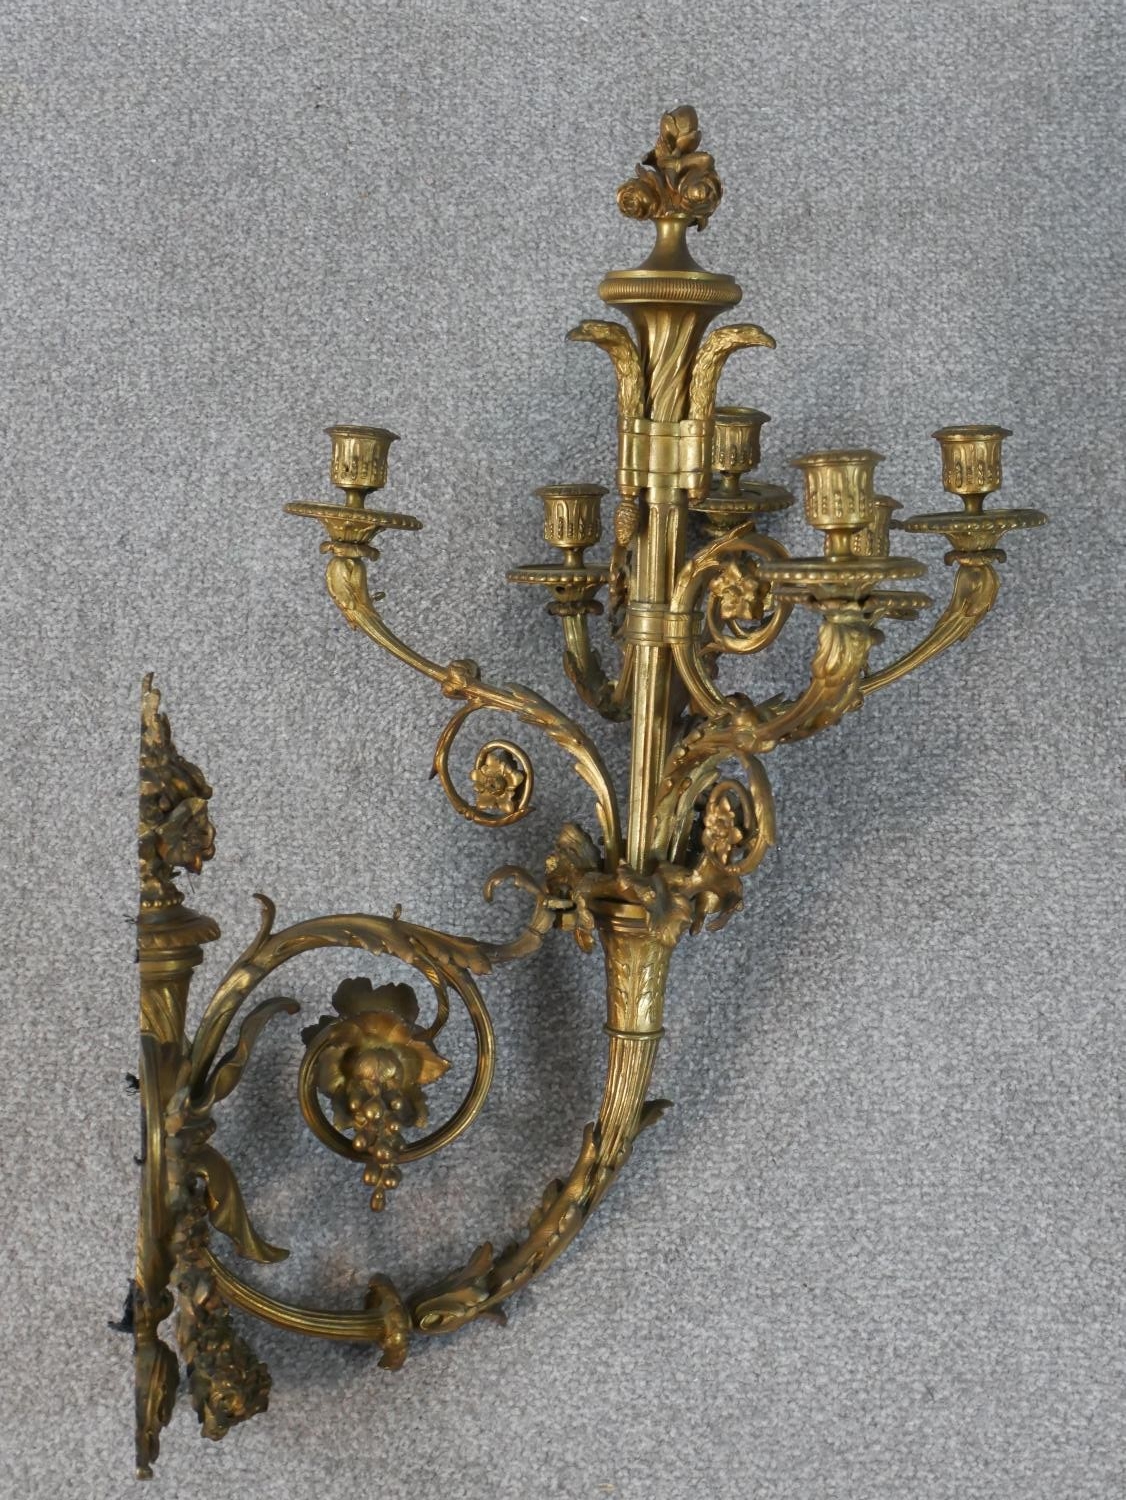 A late 19th century ormolu wall applique, the torch form wall mount hung with garlands of flowers - Image 5 of 8